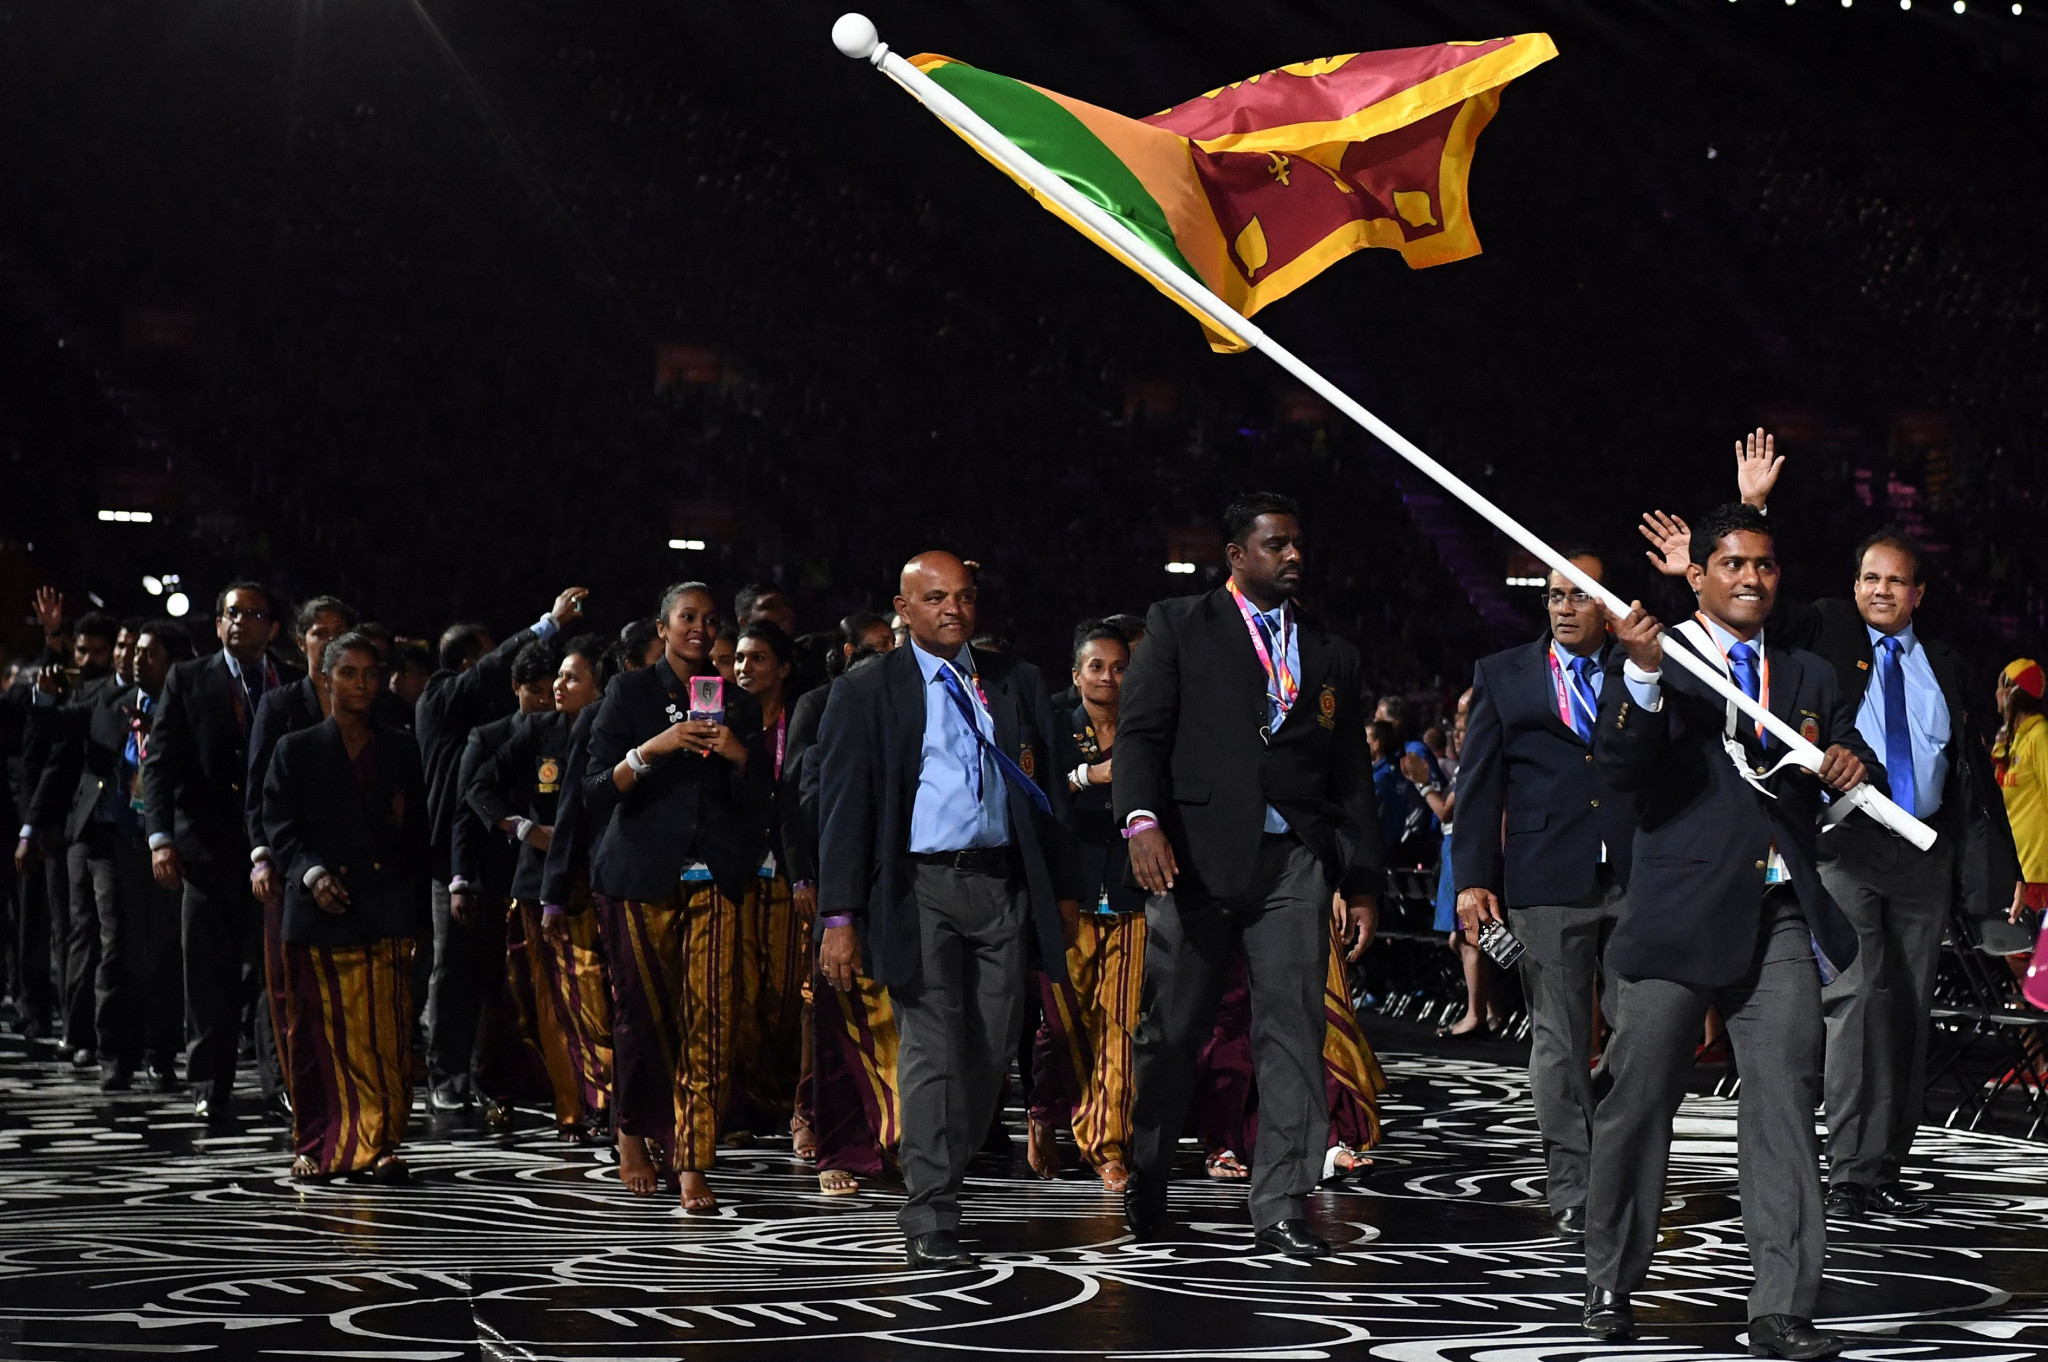 Sri Lanka has had to prepare for the Commonwealth Games under the cloud of the economic crisis at home ©Getty Images